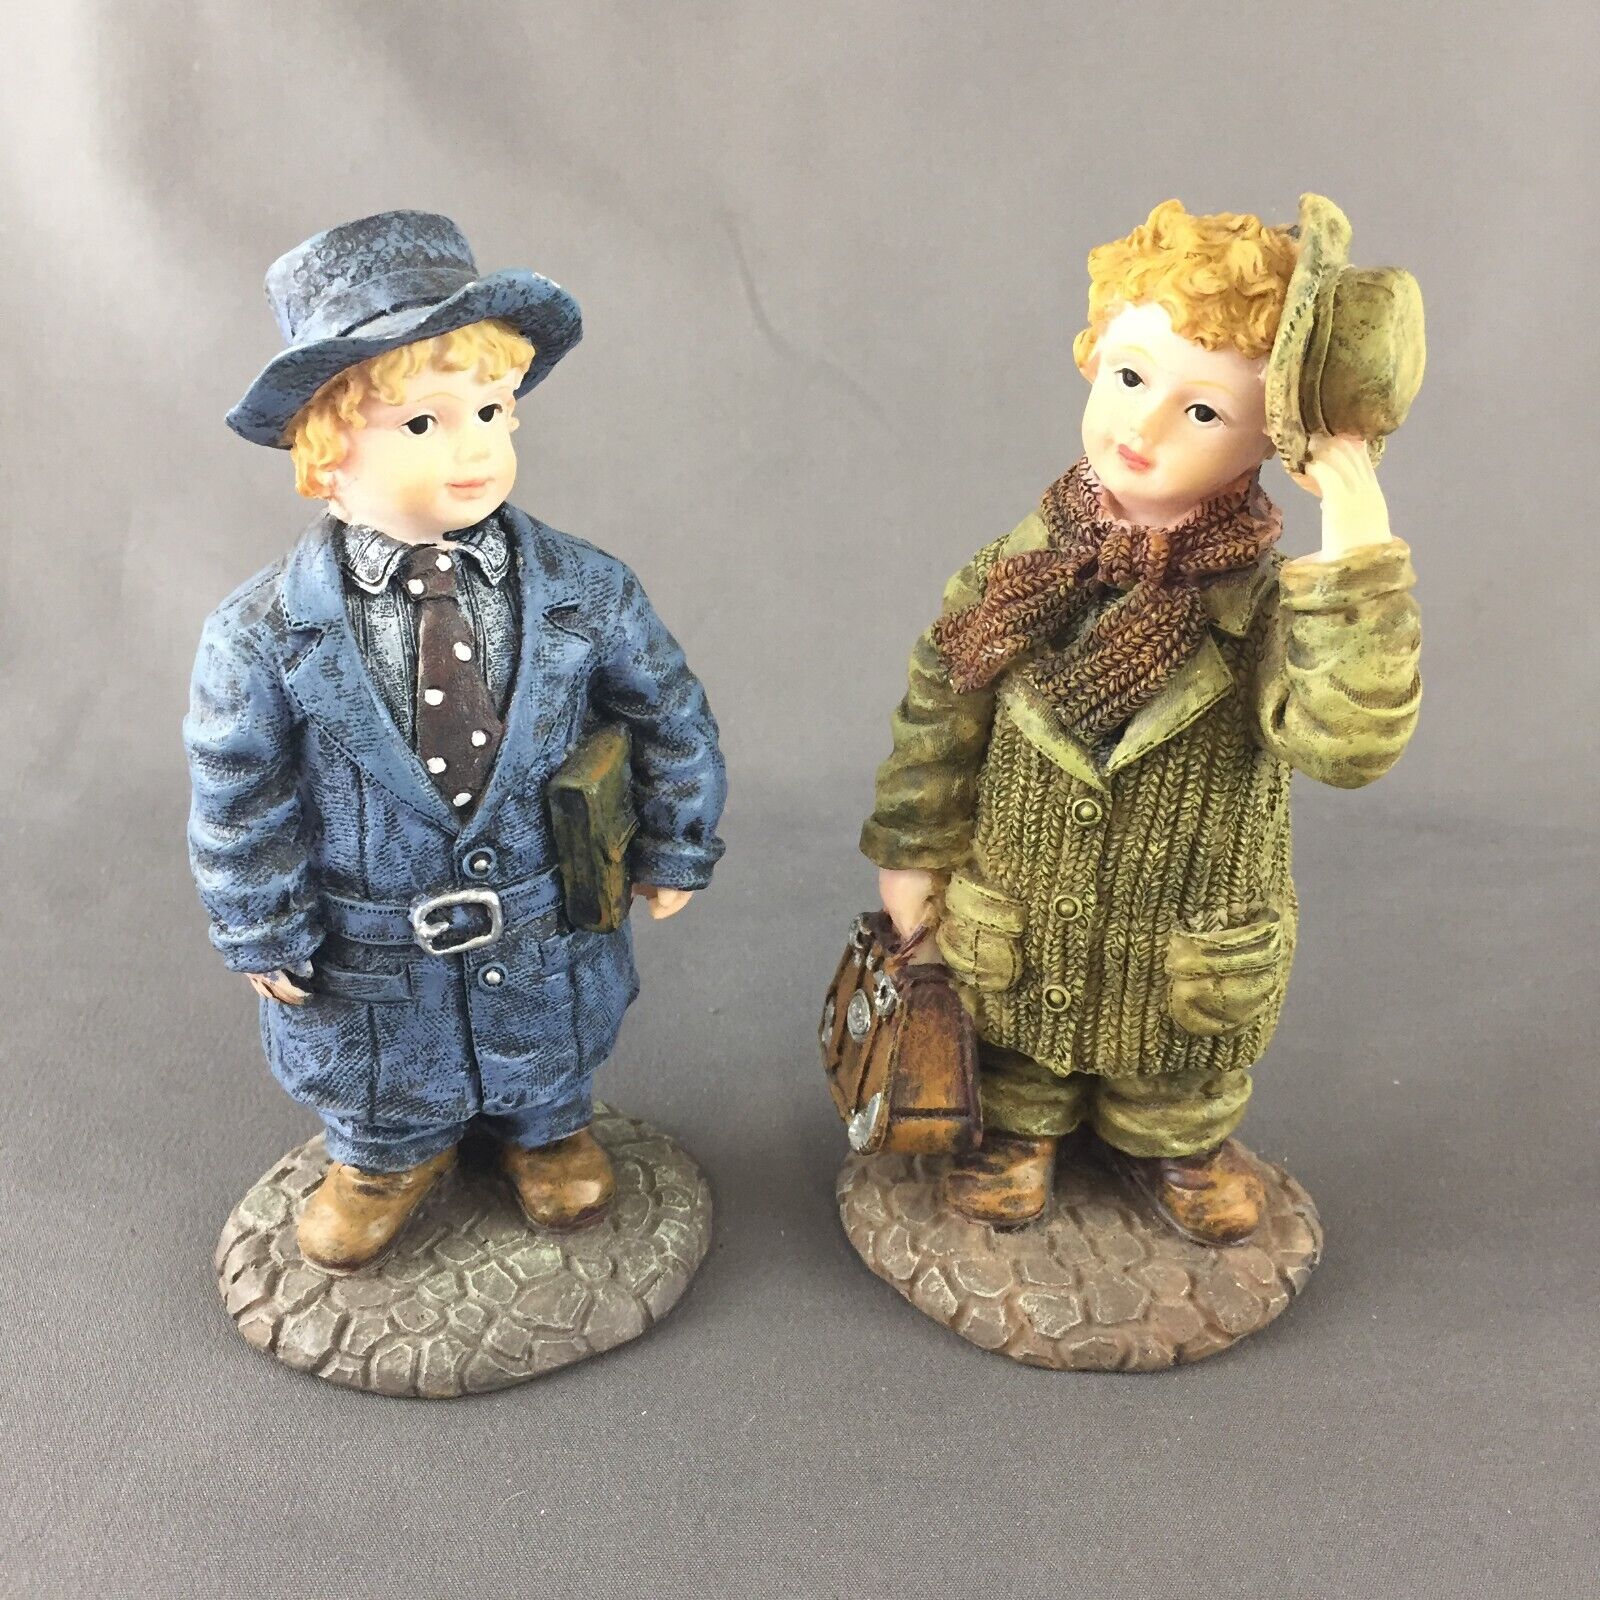 Vintage Pair of 2 Resin Figurines - Boys Dressed in Business Attire Blue & Green